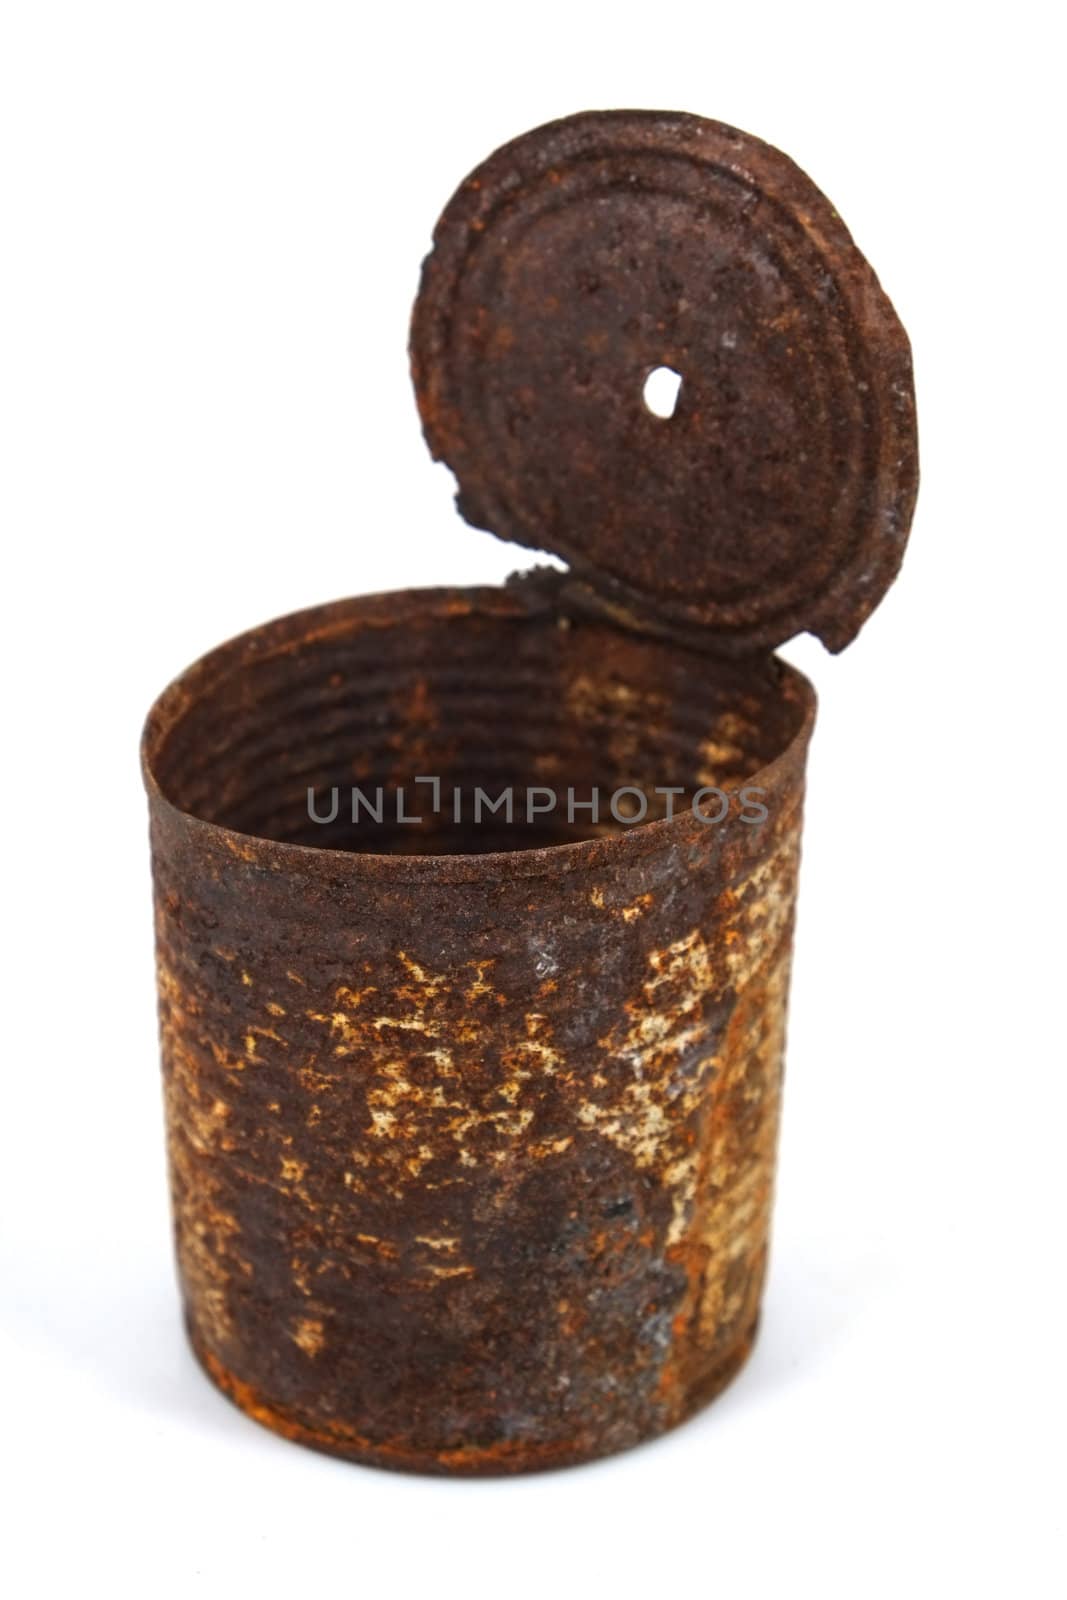 Rusty tin can isolated on white